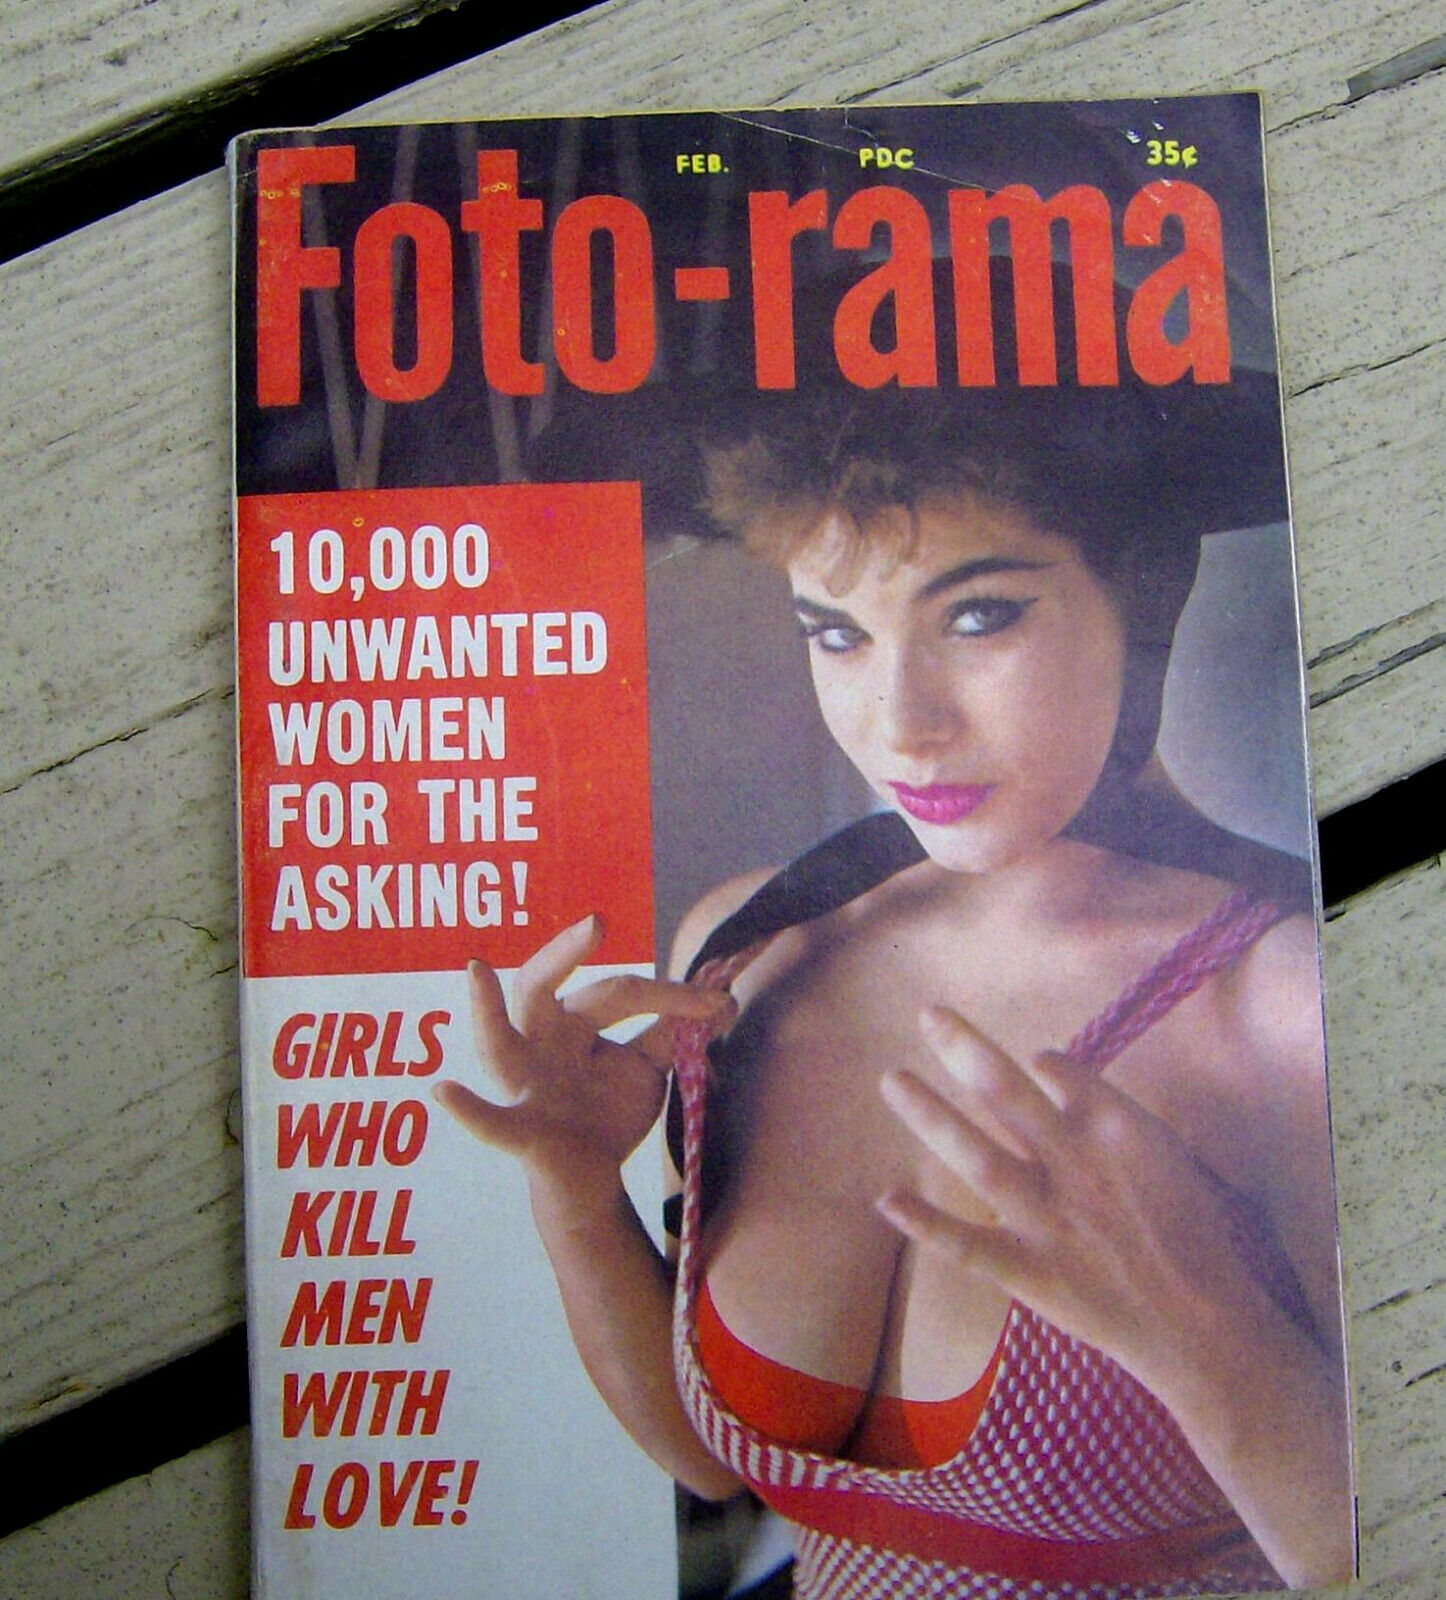 RARE vintage FEB. 1960 FOTO-RAMA magazine digest sized SLIGHTLY RISQUE tame old